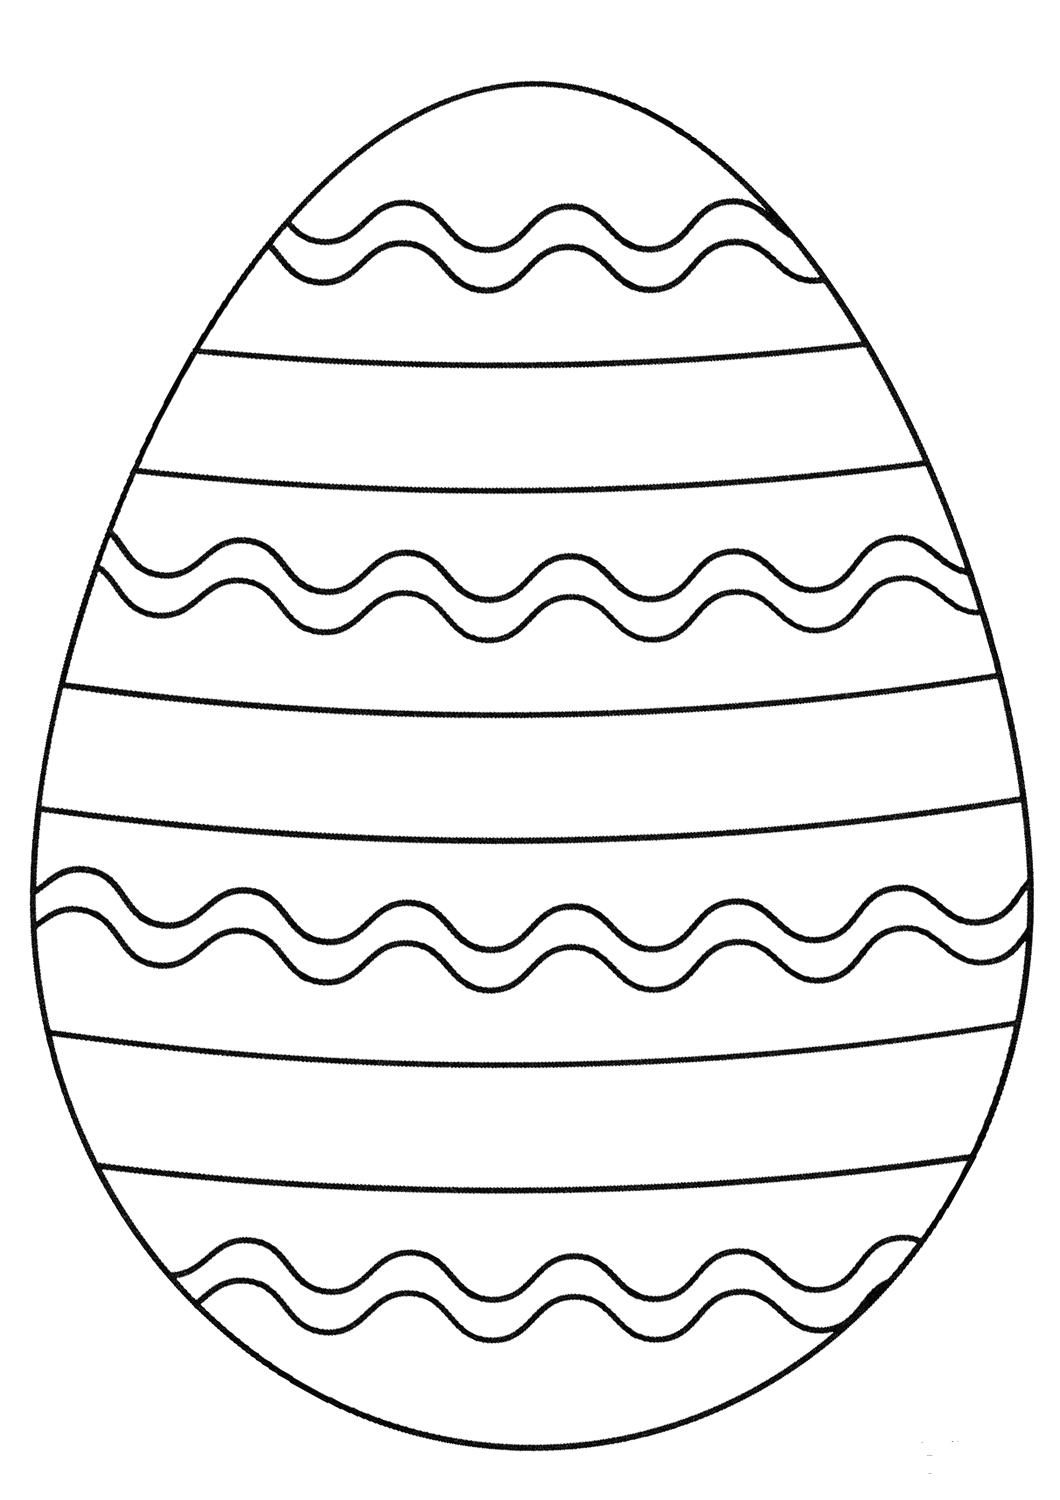 Download 30 Free Easter Egg Coloring Pages Printable